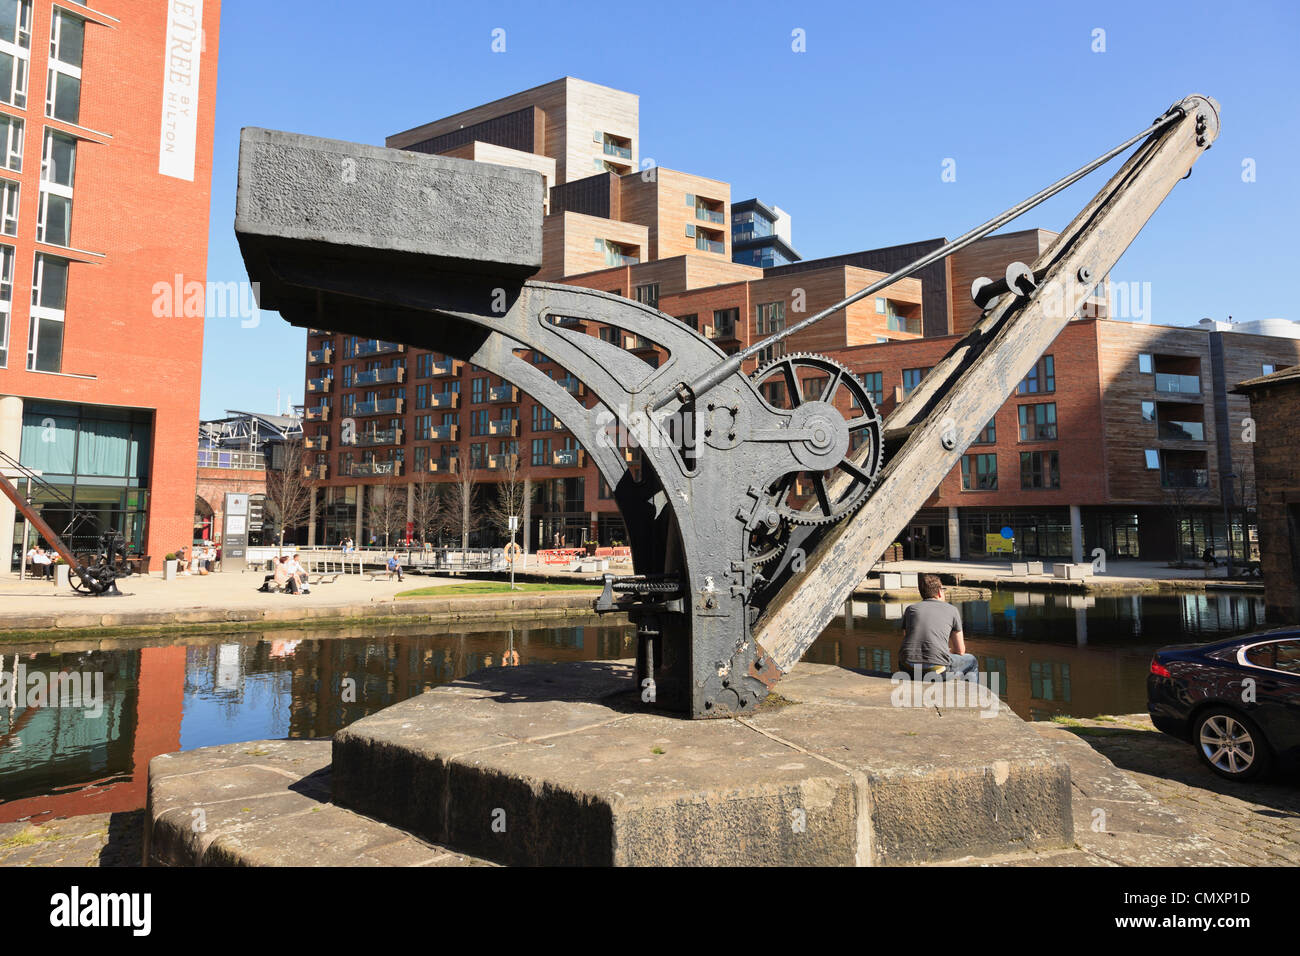 Industrial artifact by the Leeds and Liverpool canal in the redeveloped Waterfront. Granary Wharf, Leeds, Yorkshire, England, UK. Stock Photo